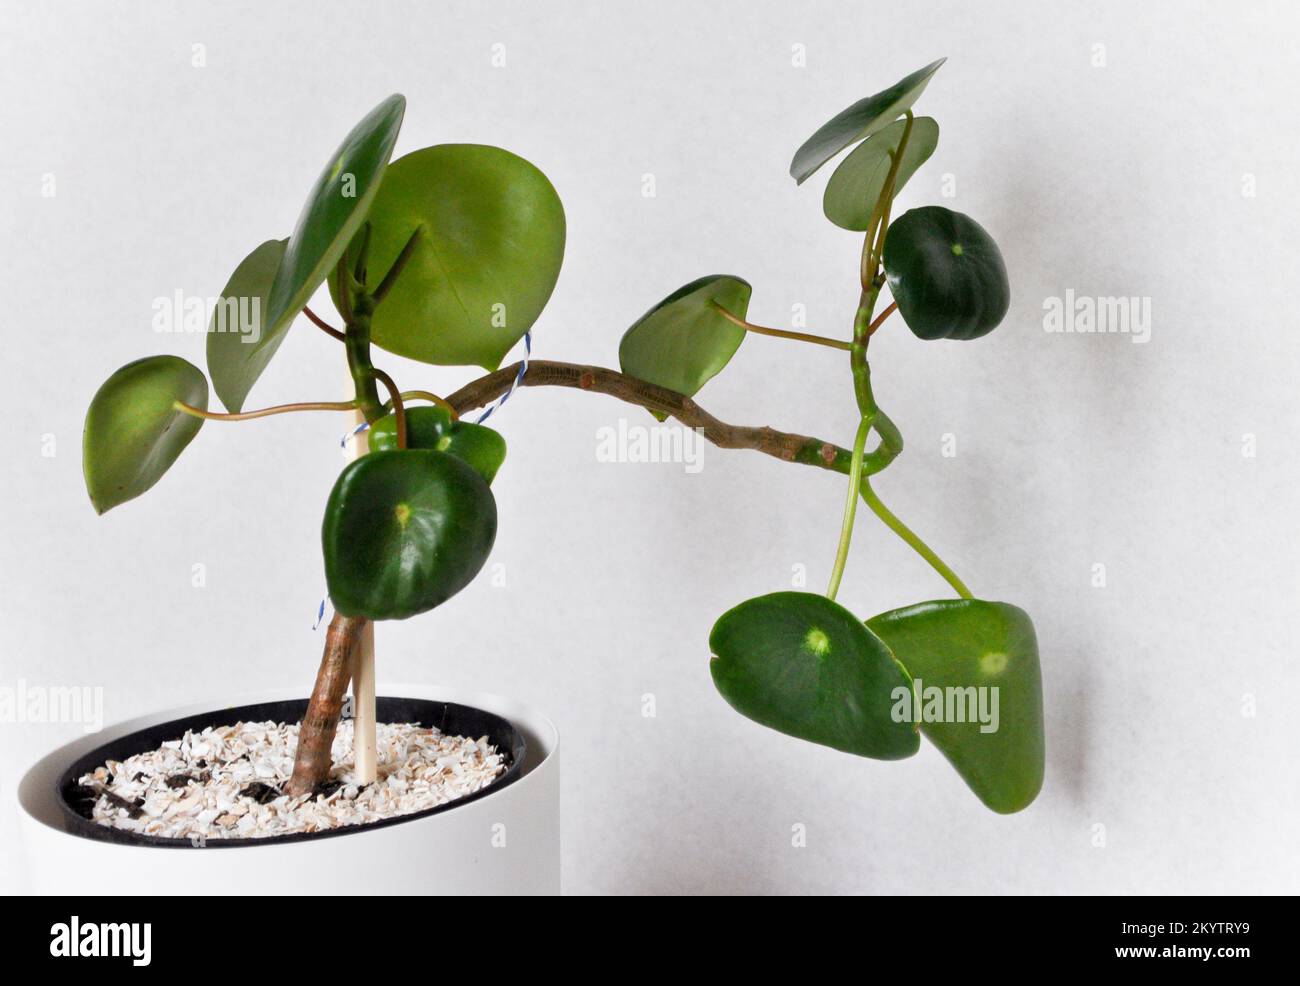 Chinese coin plant - Pilea Peperomioides Stock Photo